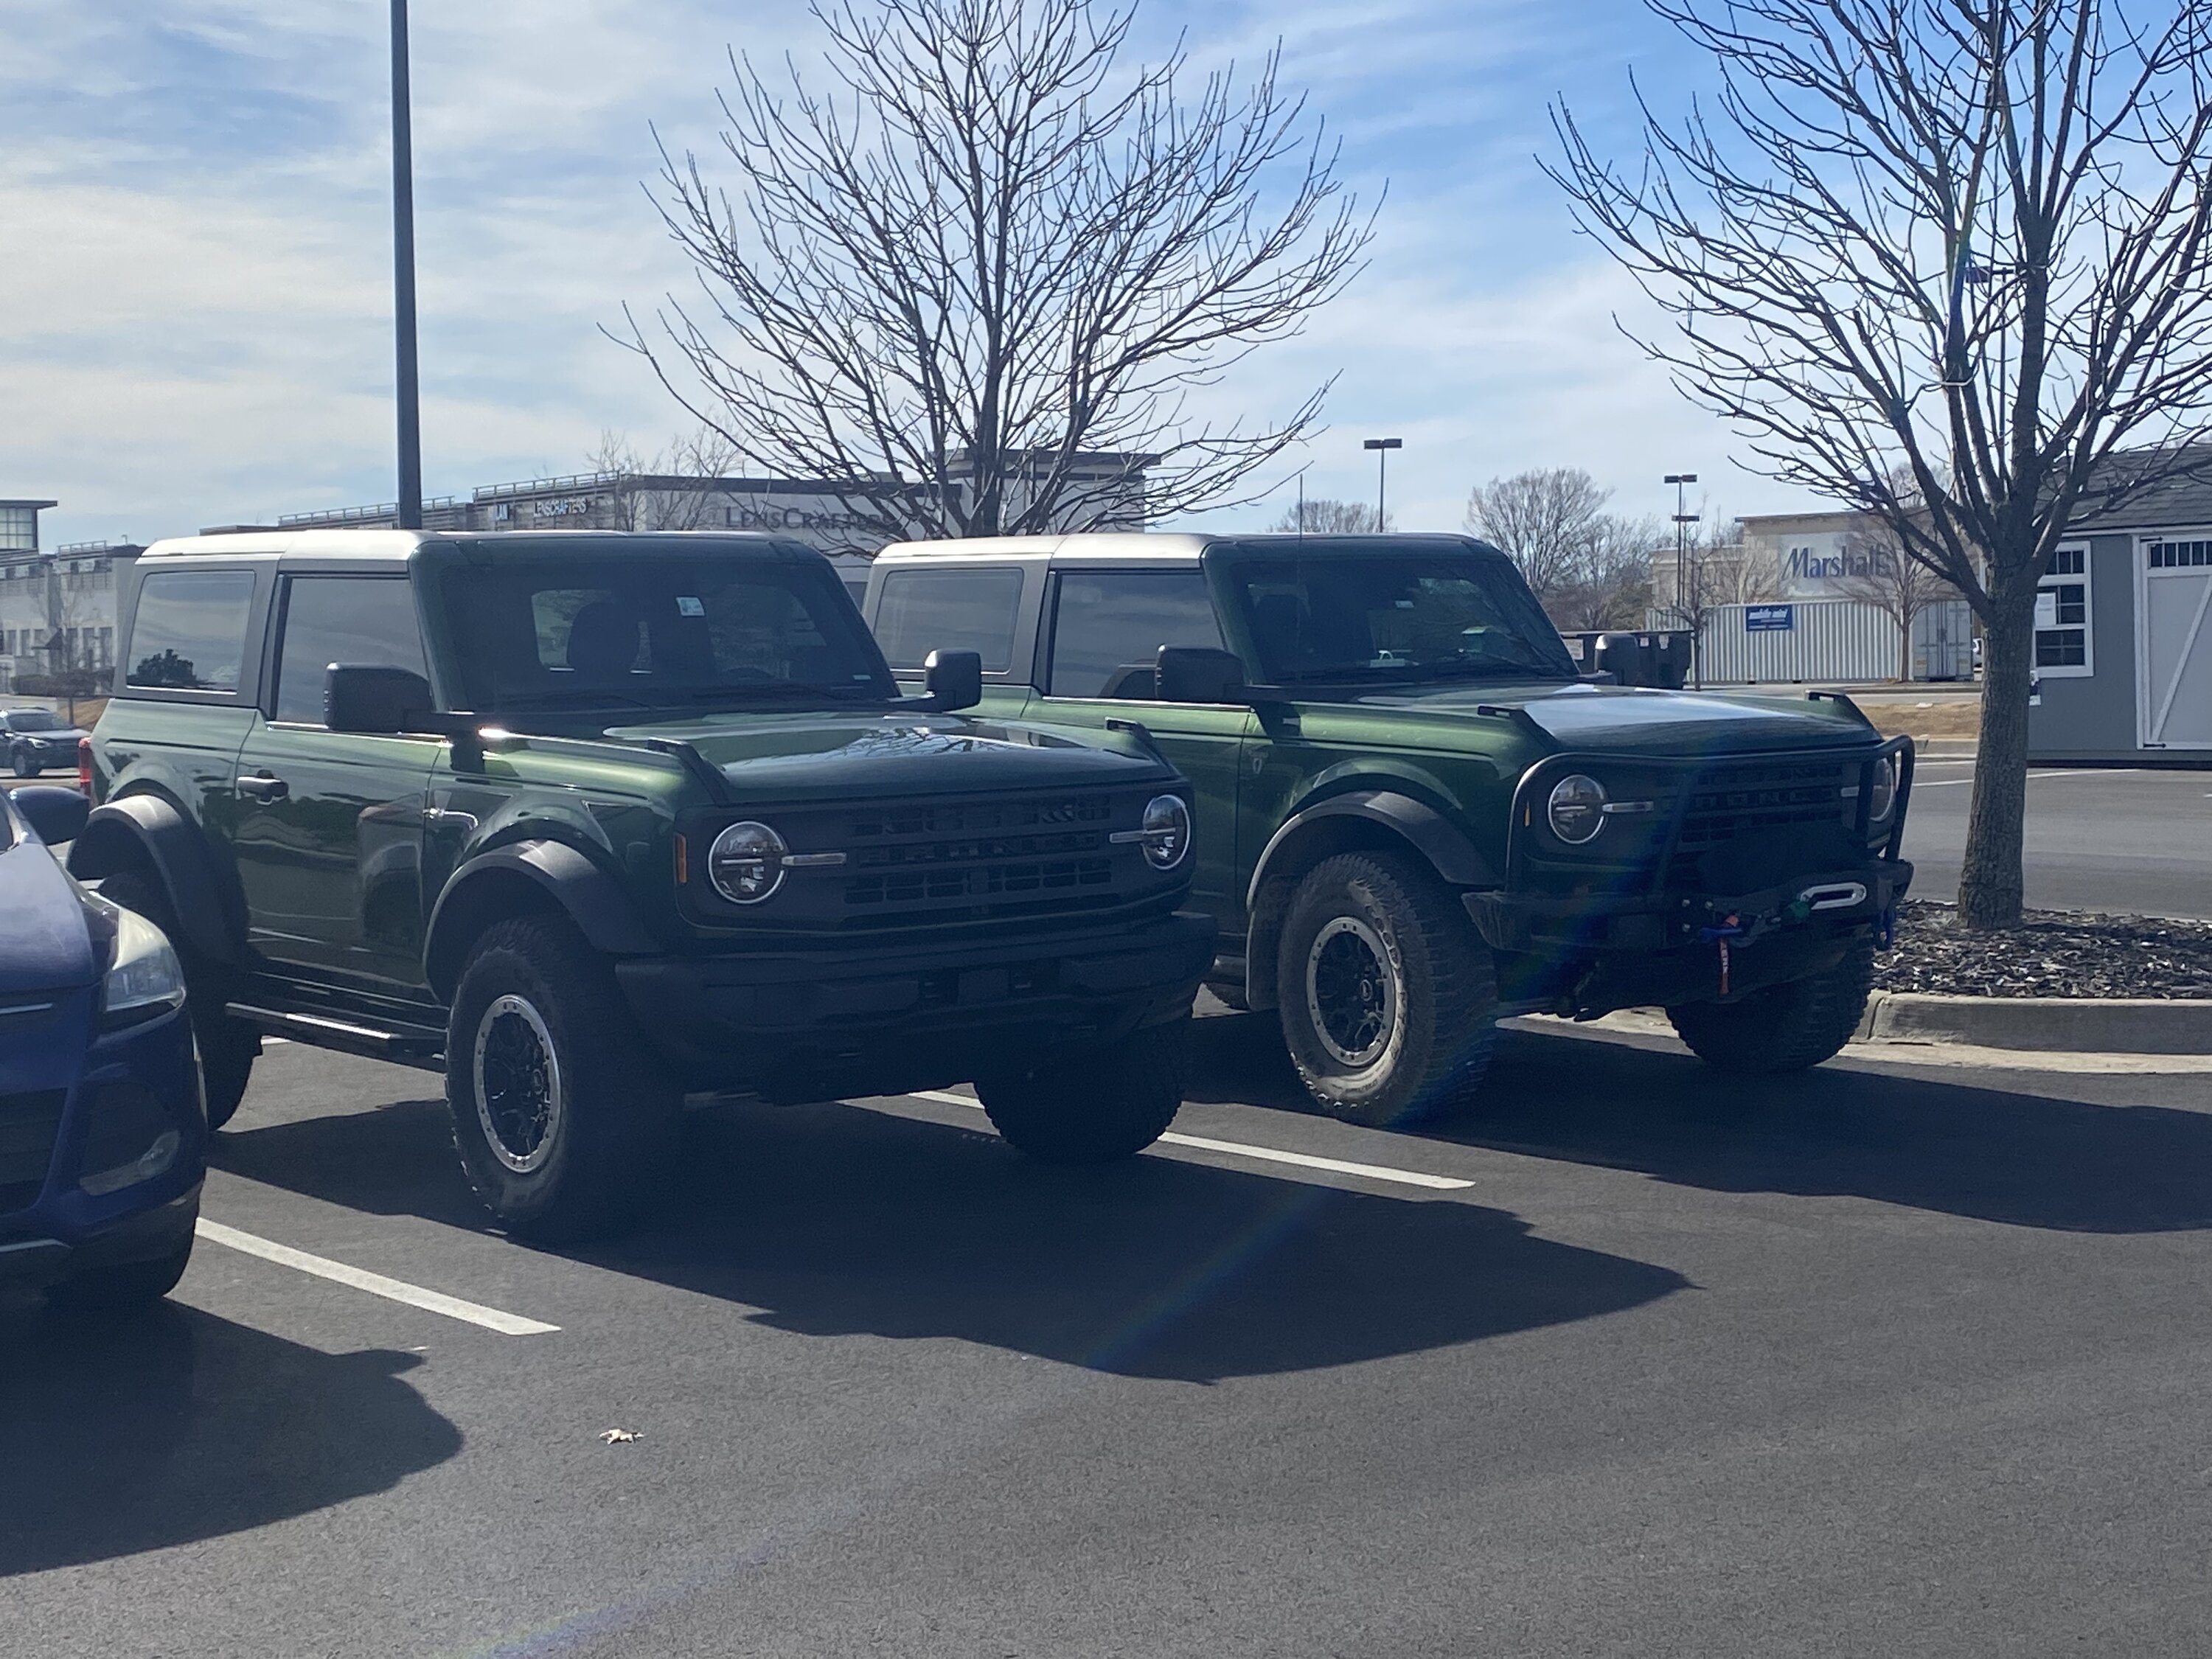 Ford Bronco Who's parked next to you? 7A6A4824-F1AB-415D-931A-8C88B82F92FF